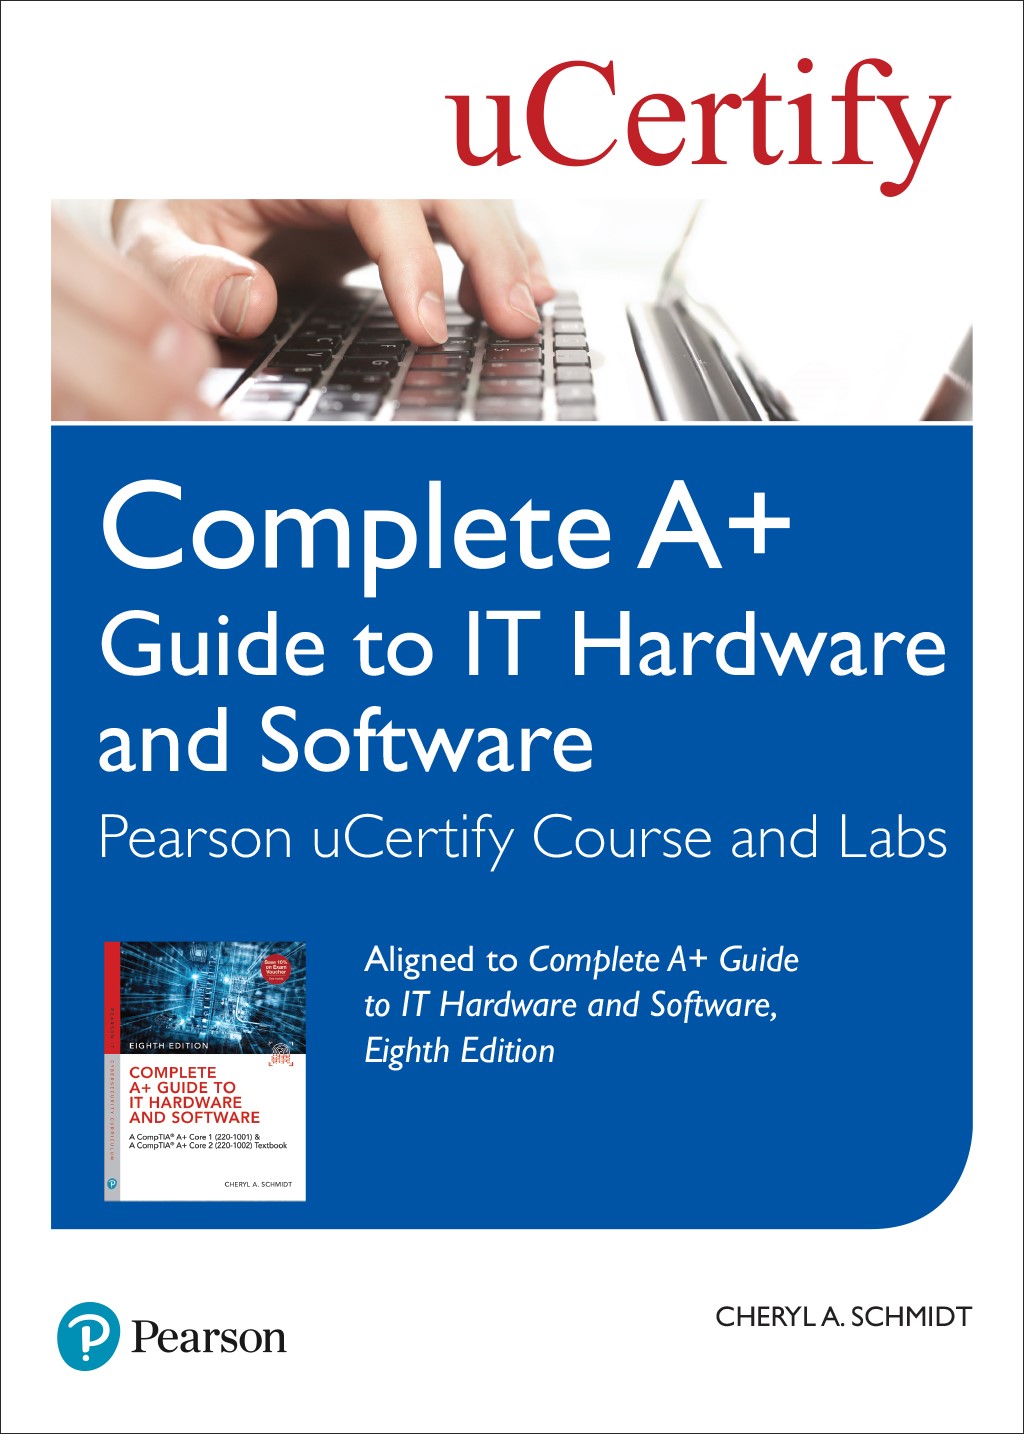 Complete A+ Guide to IT Hardware and Software Pearson uCertify Course and Labs Access Code Card